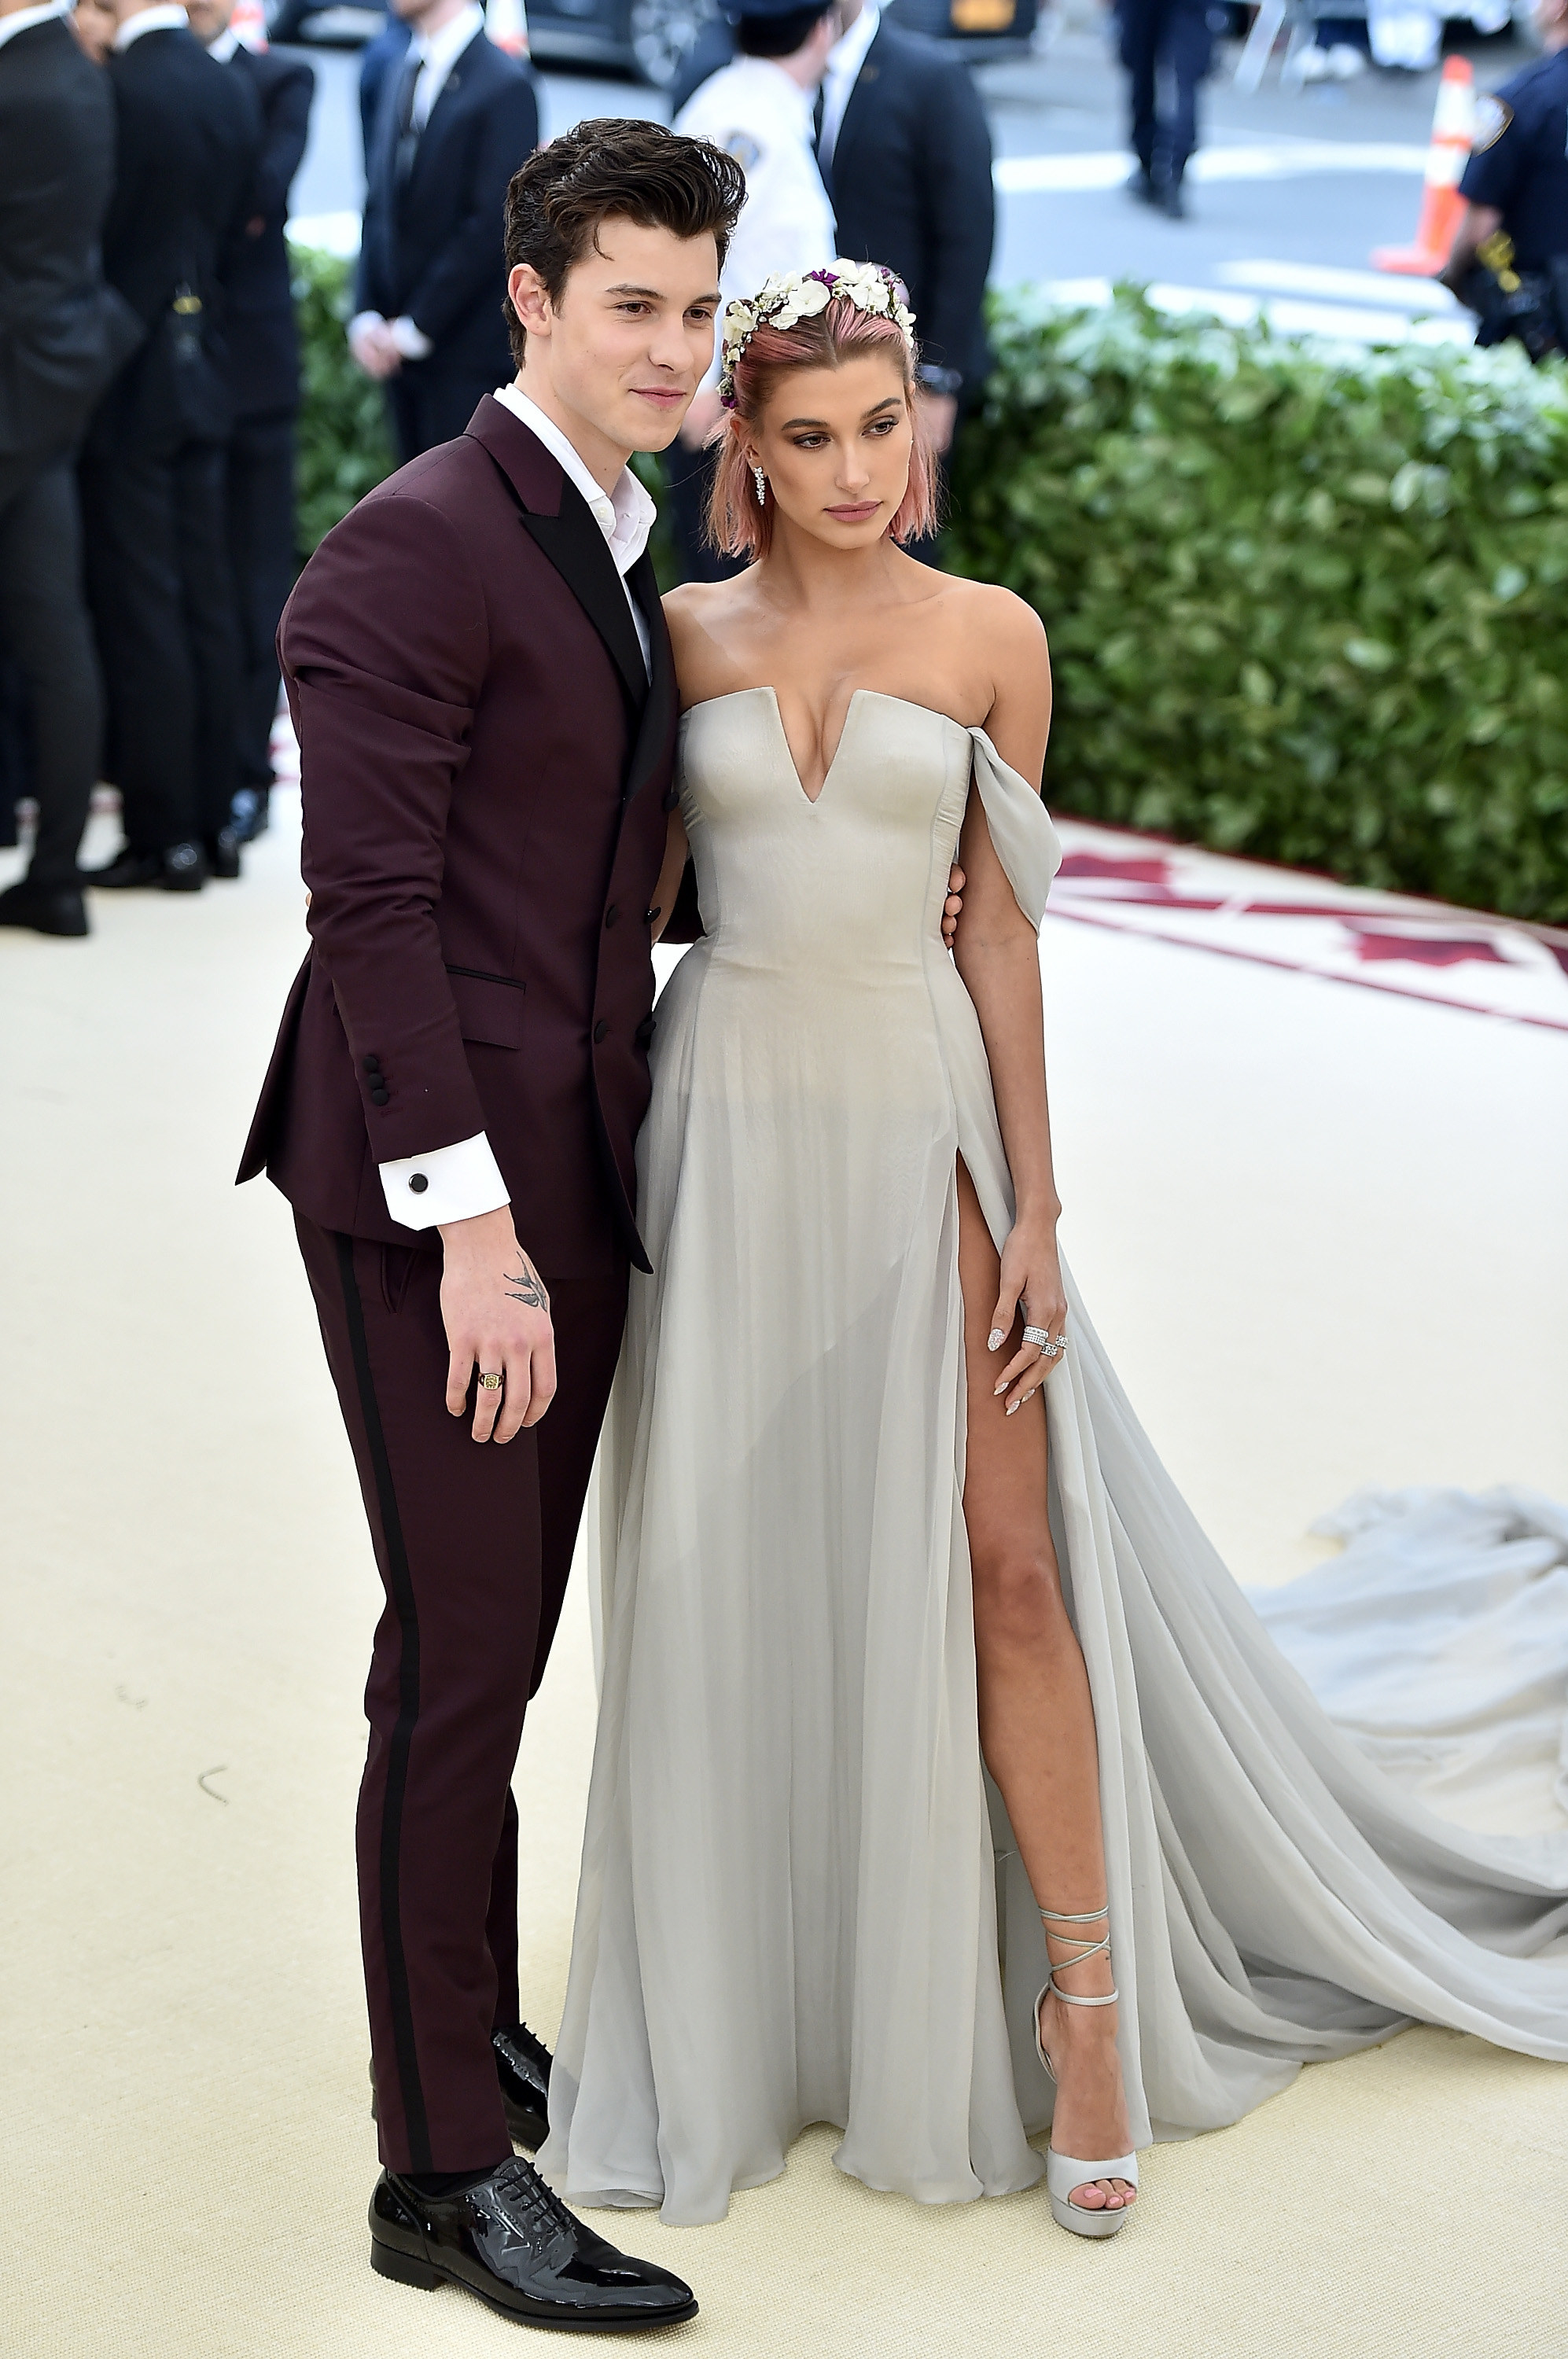 Shawn Mendes and Hailey Baldwin pose together at Met Gala